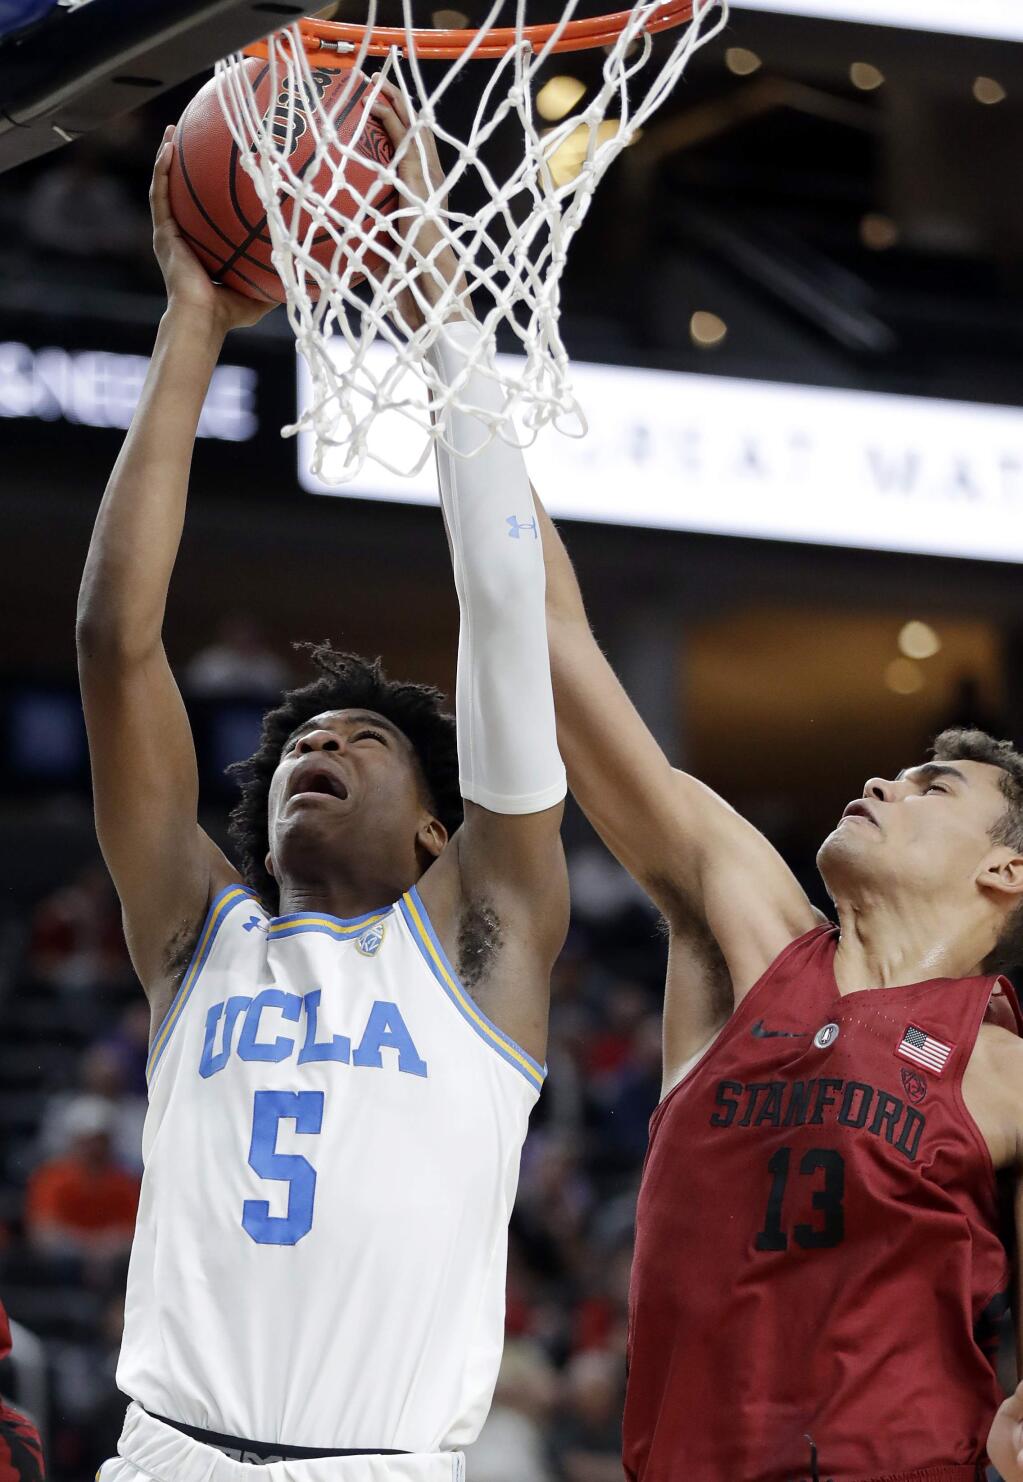 UCLA's Chris Smith (5) shoots while covered by Stanford's Oscar da Silva (13) during the first half of an NCAA college basketball game in the quarterfinals of the Pac-12 tournament Thursday, March 8, 2018, in Las Vegas. (AP Photo/Isaac Brekken)